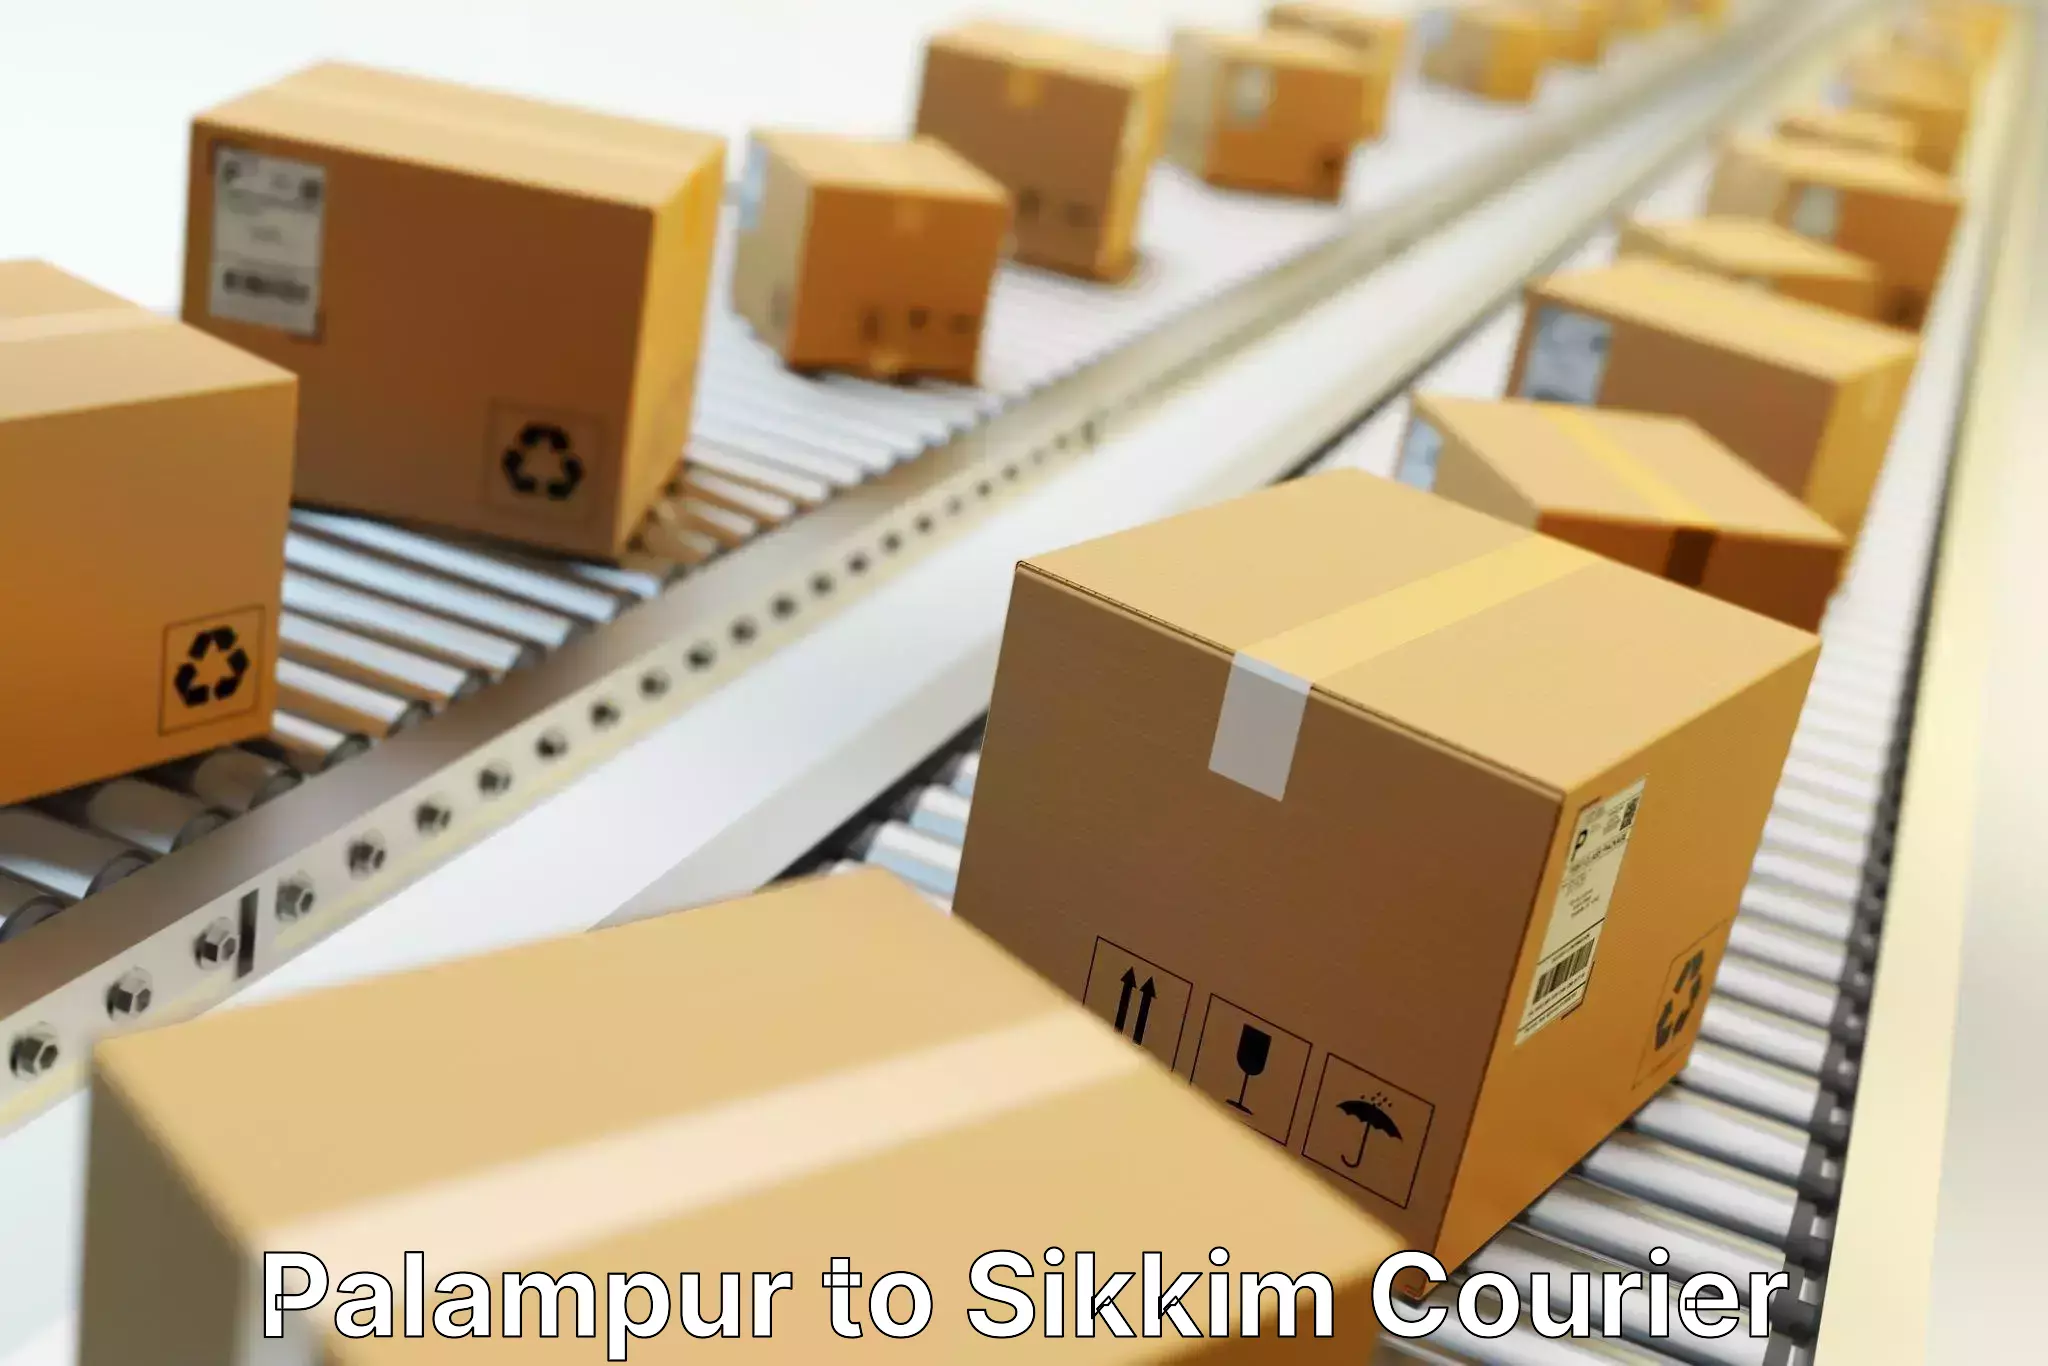 Flexible delivery scheduling Palampur to Sikkim